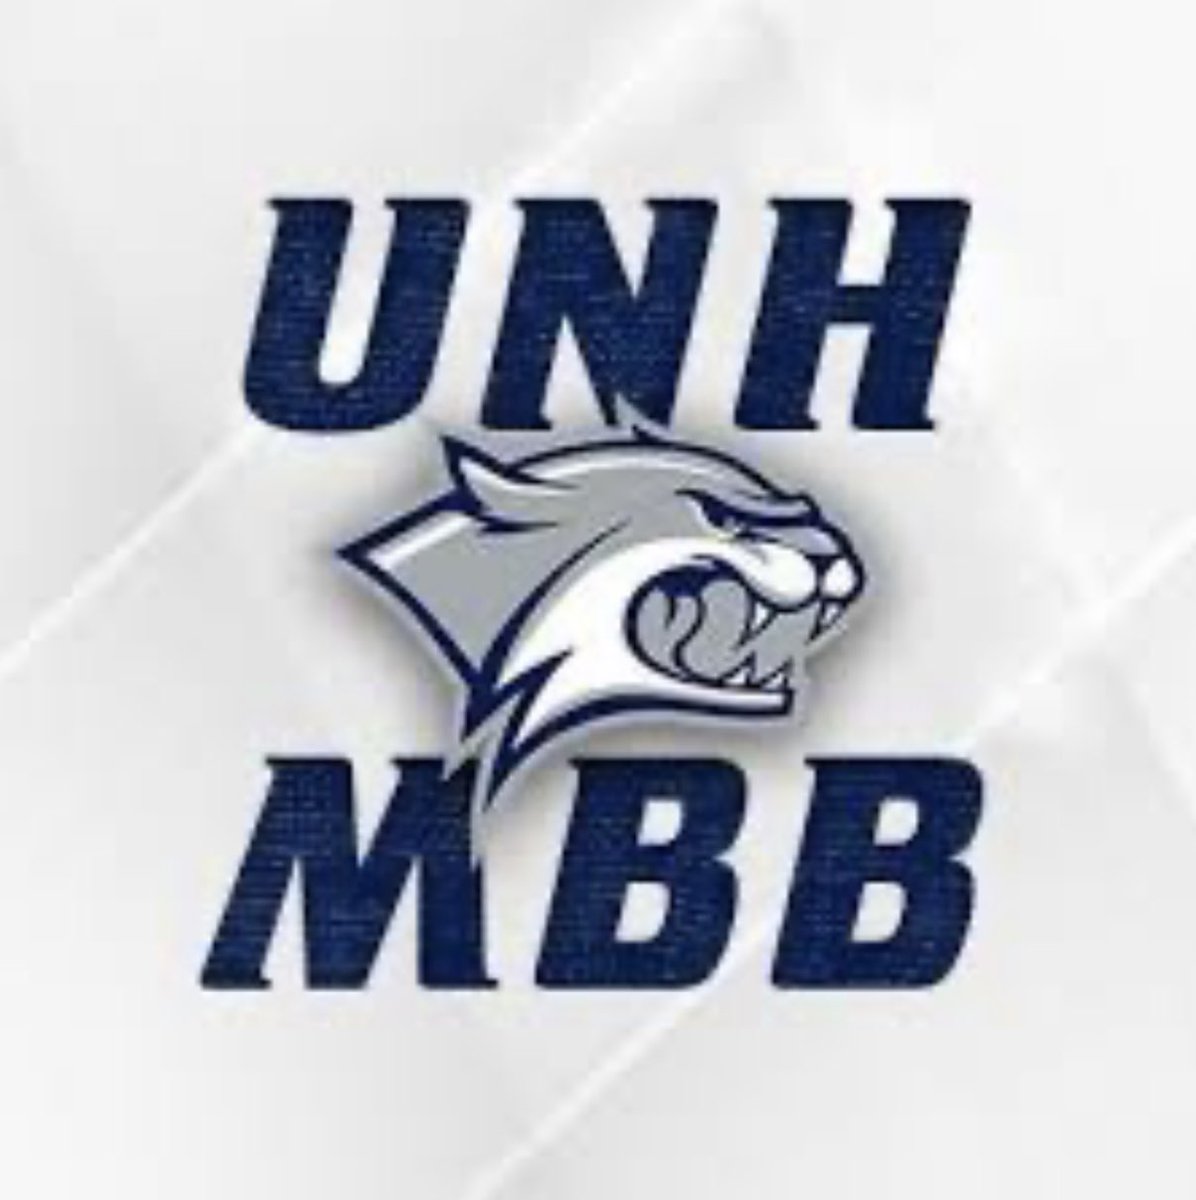 Blessed to receive an offer from the University of New Hampshire